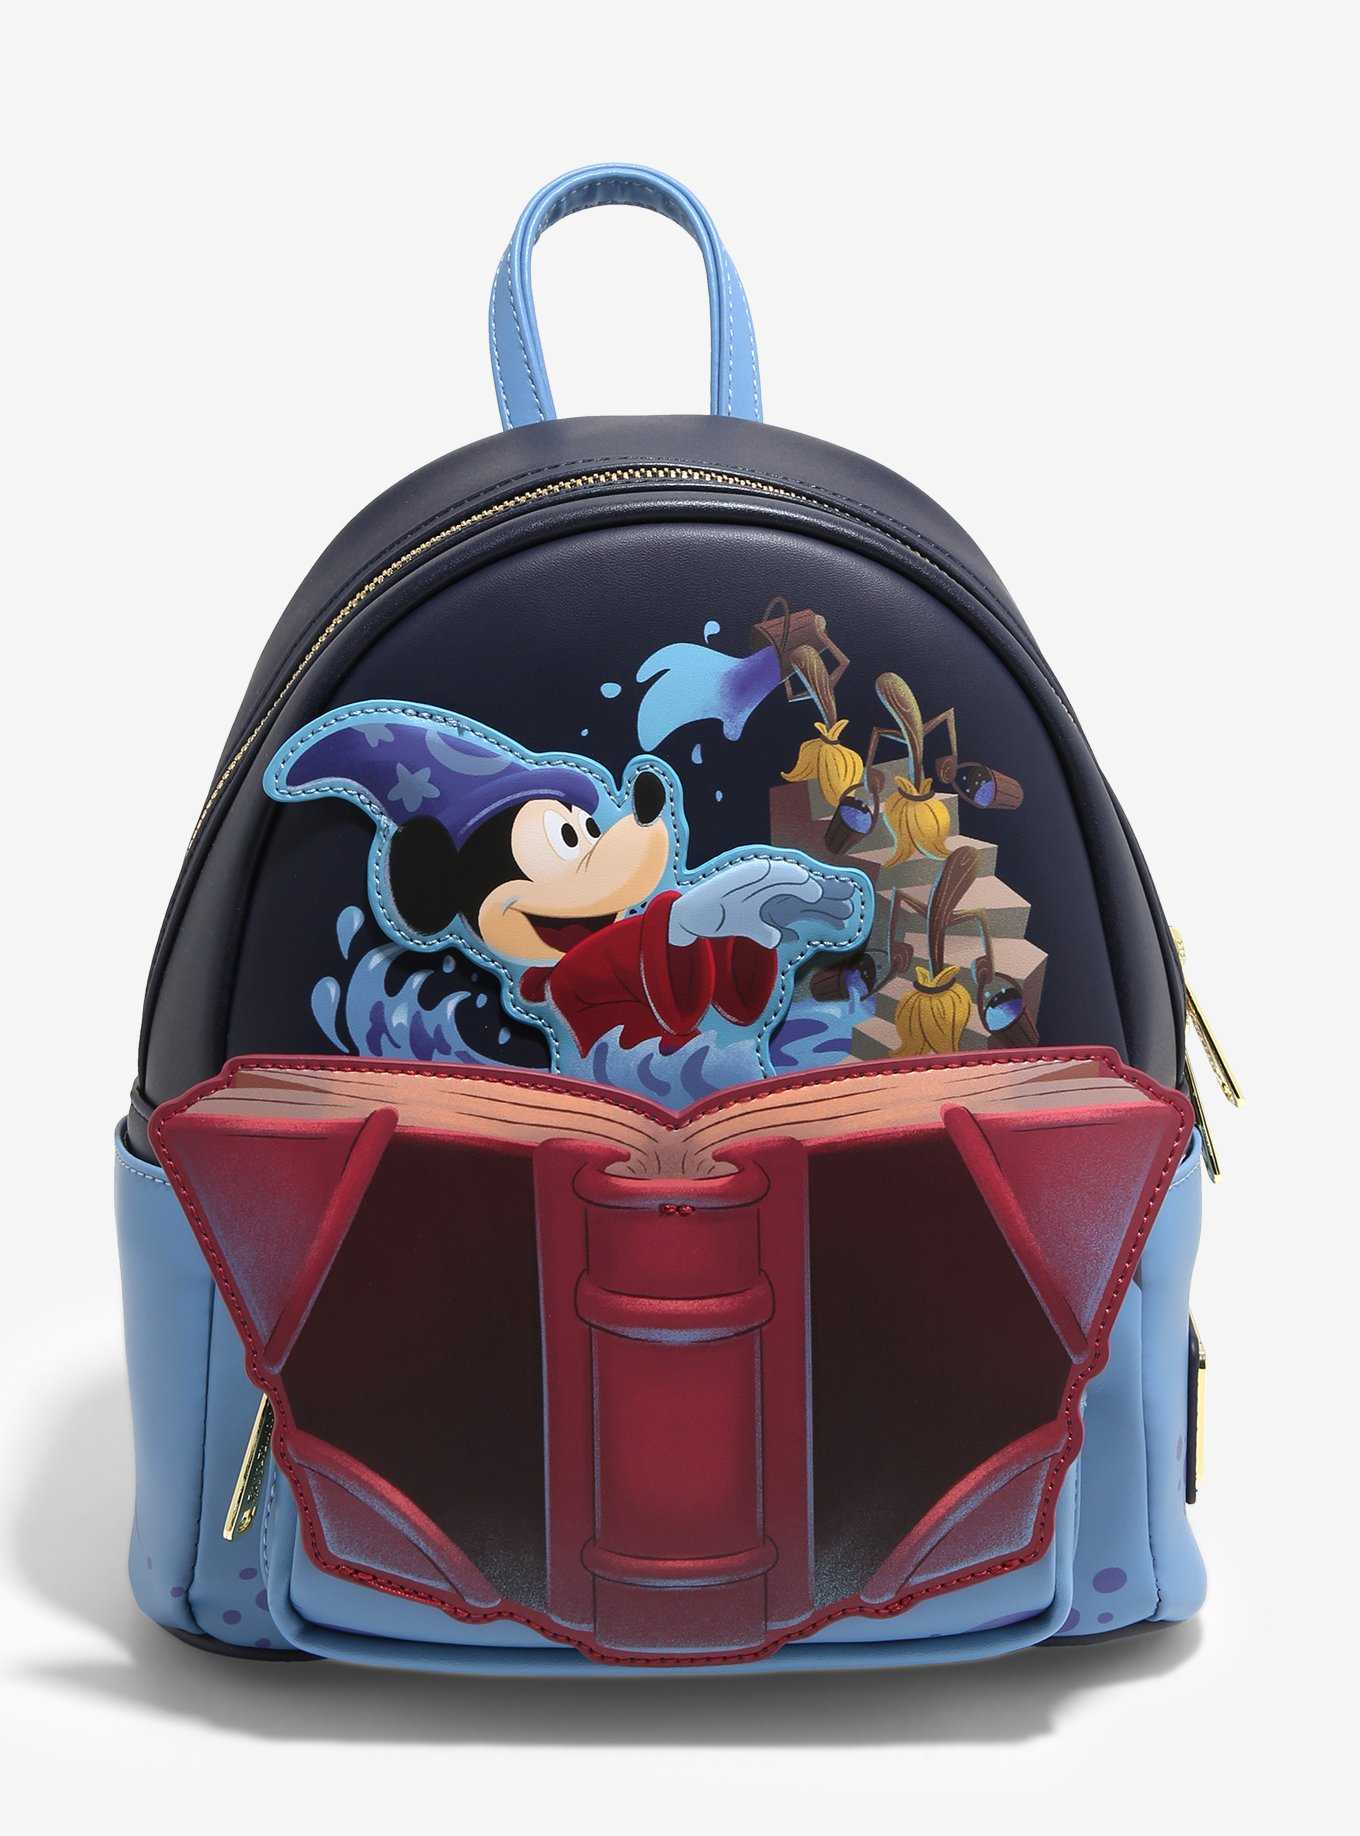 Loungefly Disney Fantasia Sorcerer's Apprentice Mickey Mouse Mini Backpack, , hi-res